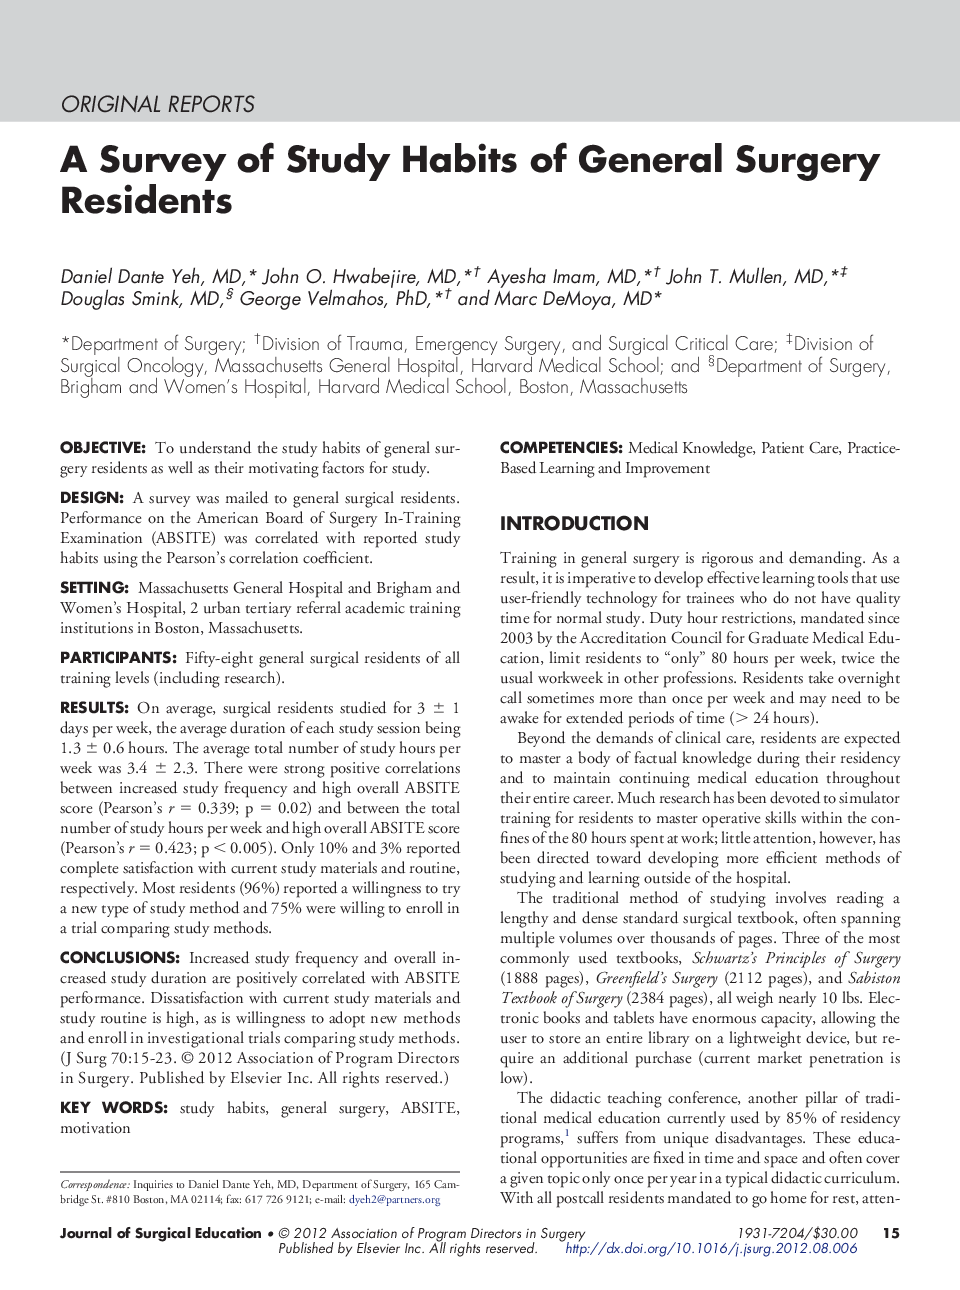 A Survey of Study Habits of General Surgery Residents